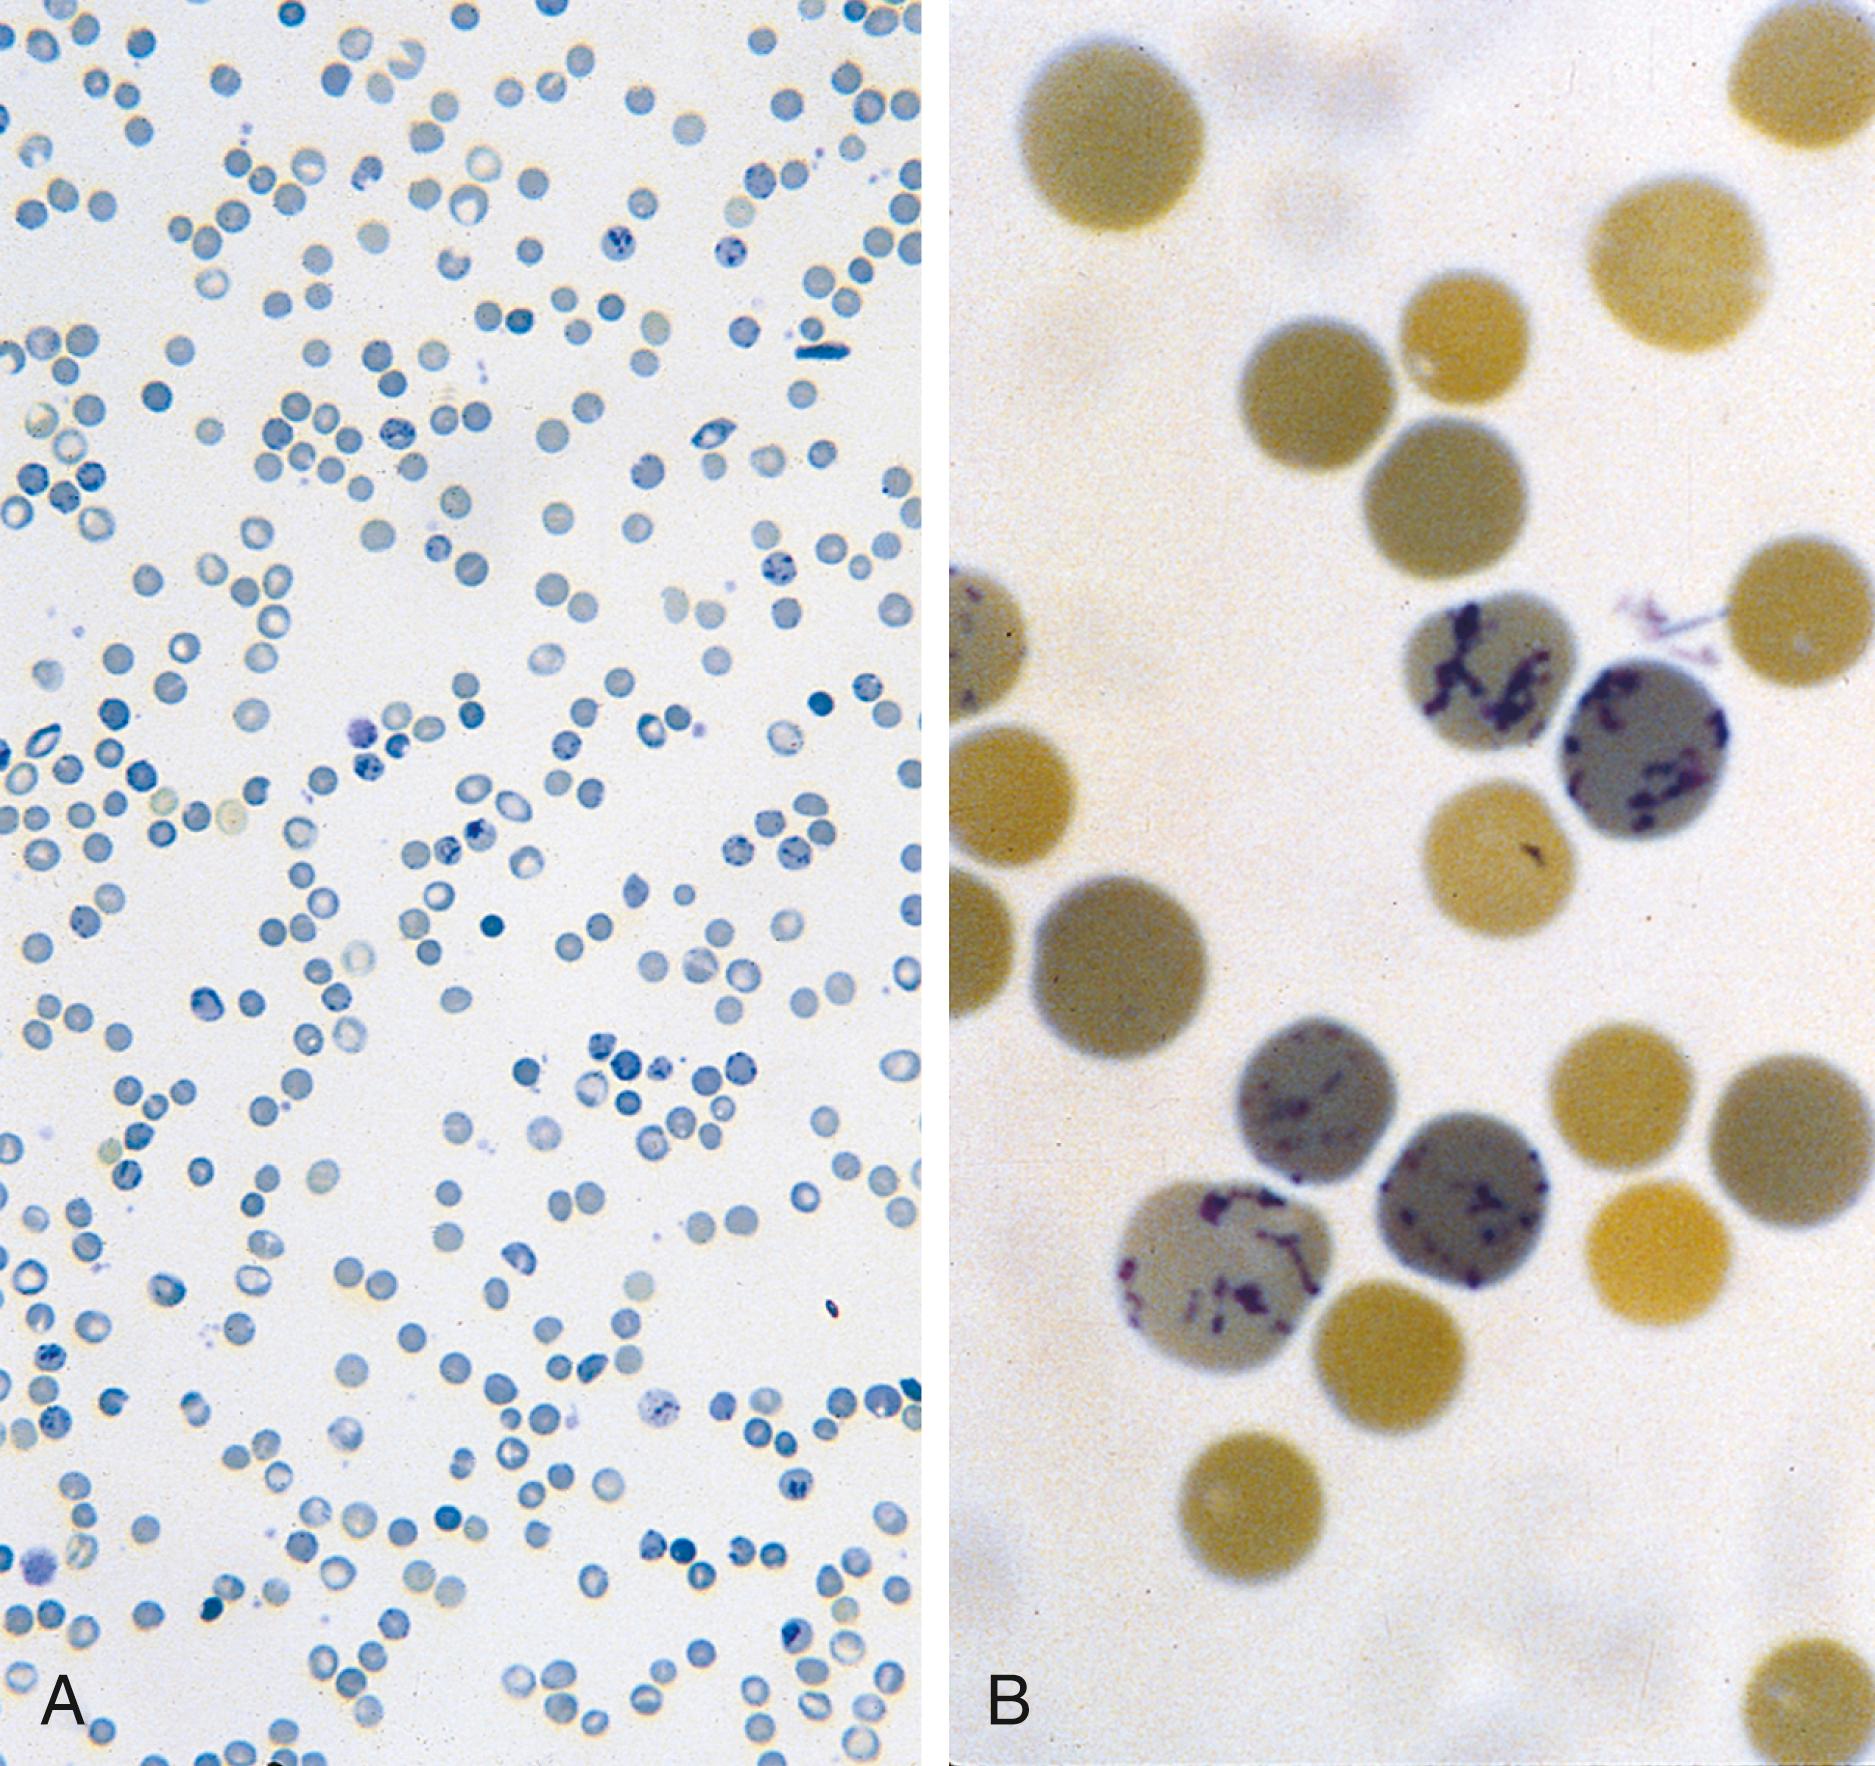 Fig. 12.3, The reticulocyte. (A) A reticulin-stained peripheral blood smear in a patient with a high (18%) reticulocyte count. The darkly stained cells are reticulocytes seen in the peripheral blood of a patient with hemolytic anemia. (B) High magnification of reticulocytes.